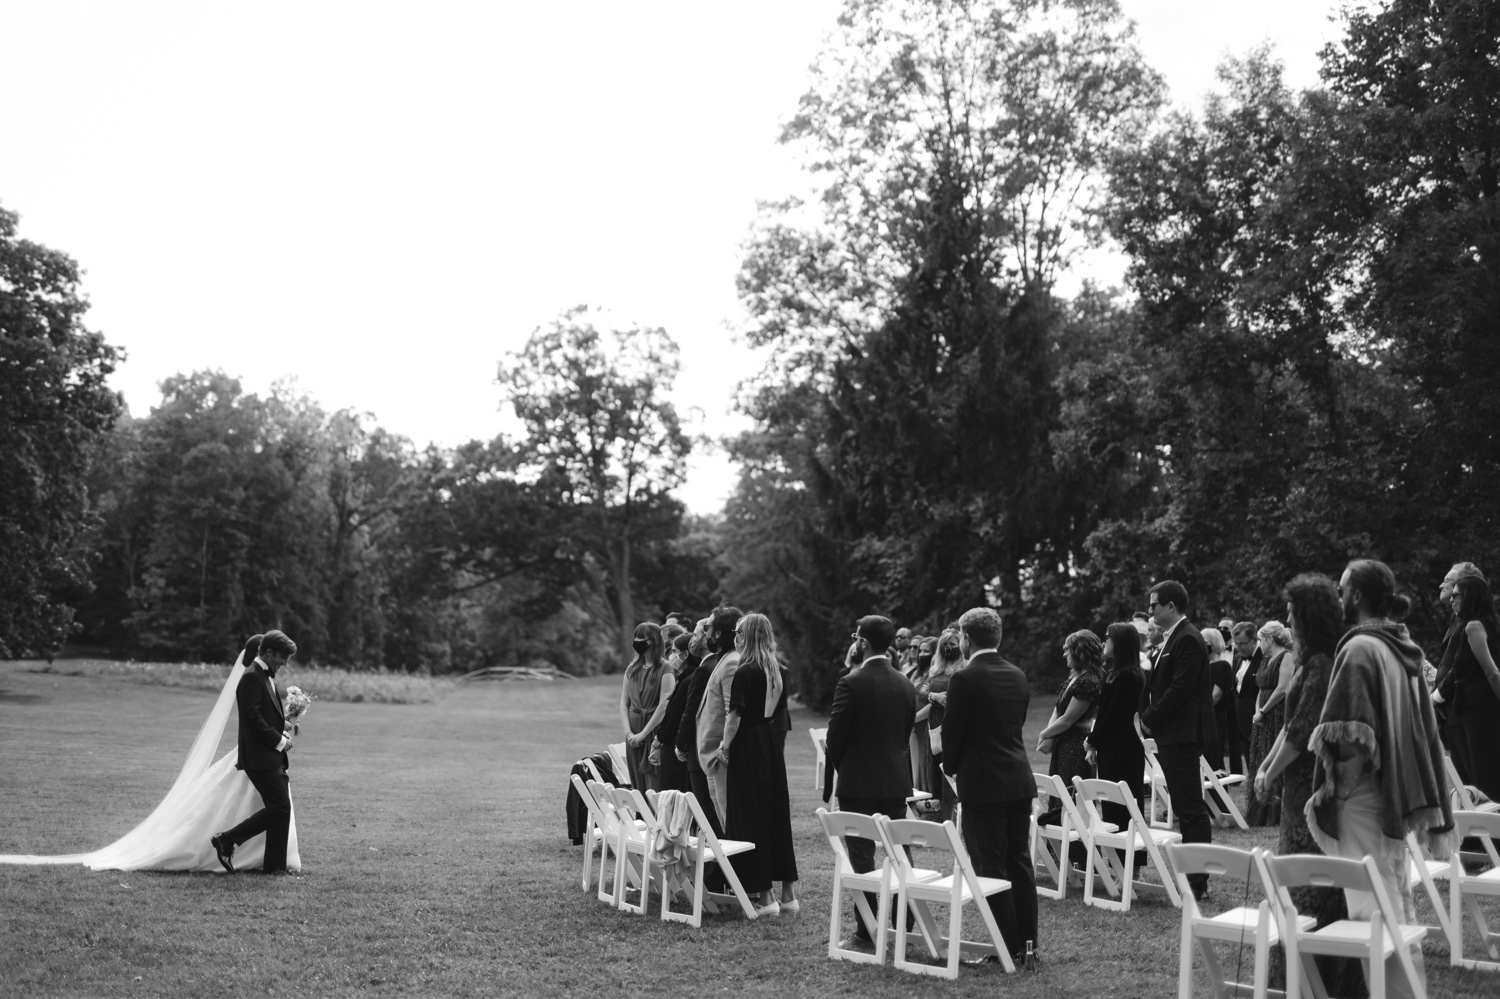 Wedding ceremony at A Private Estate in Germantown, New York